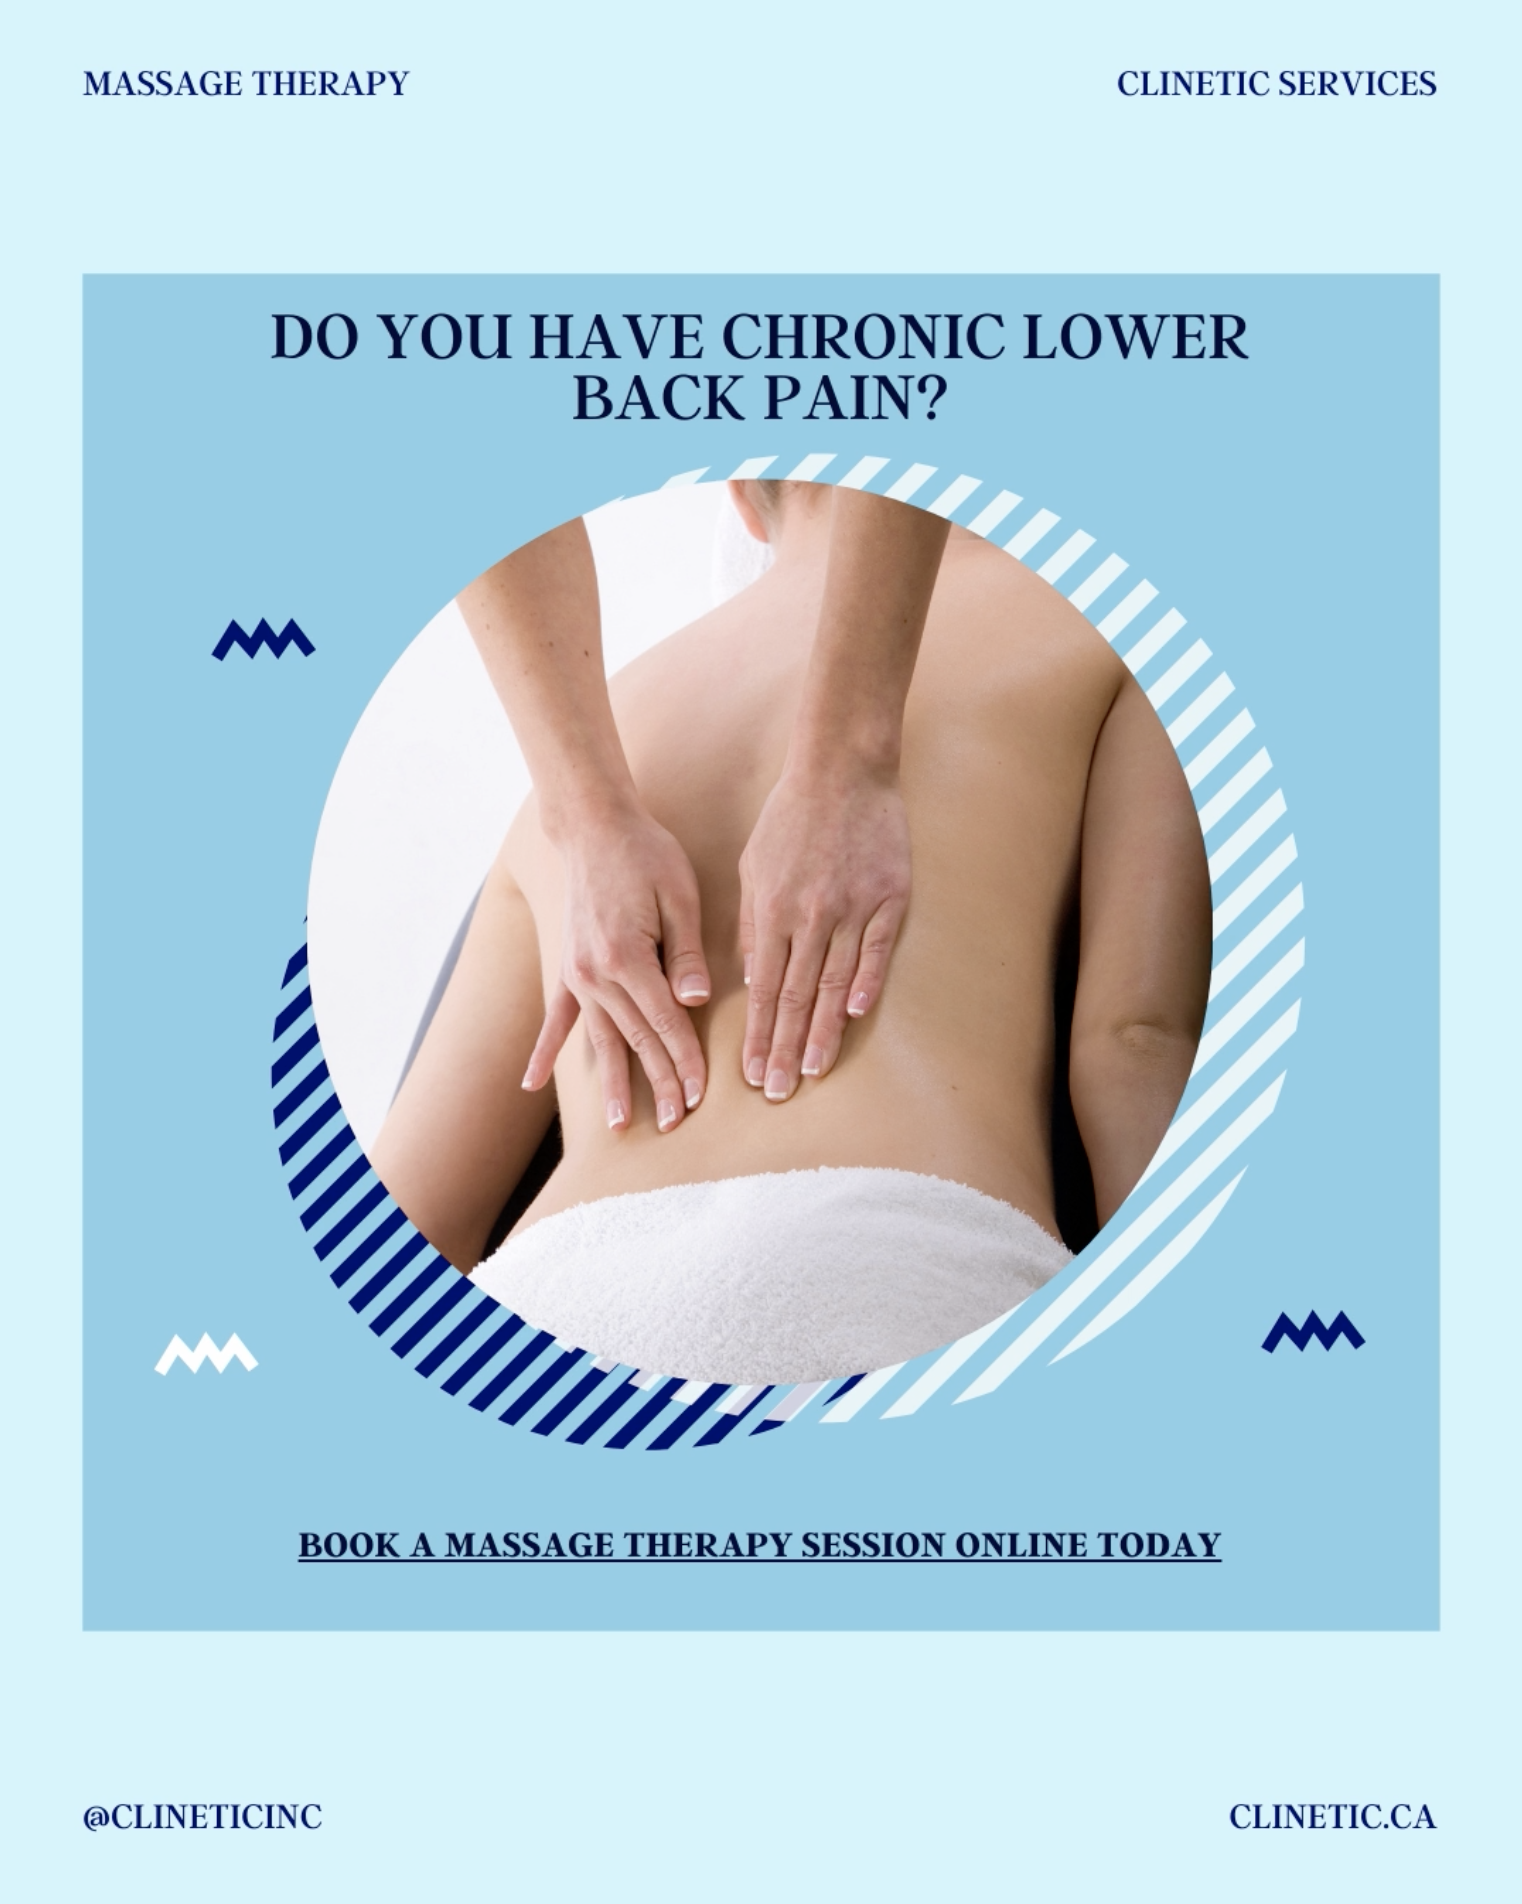 Does chronic lower back pain affect you?